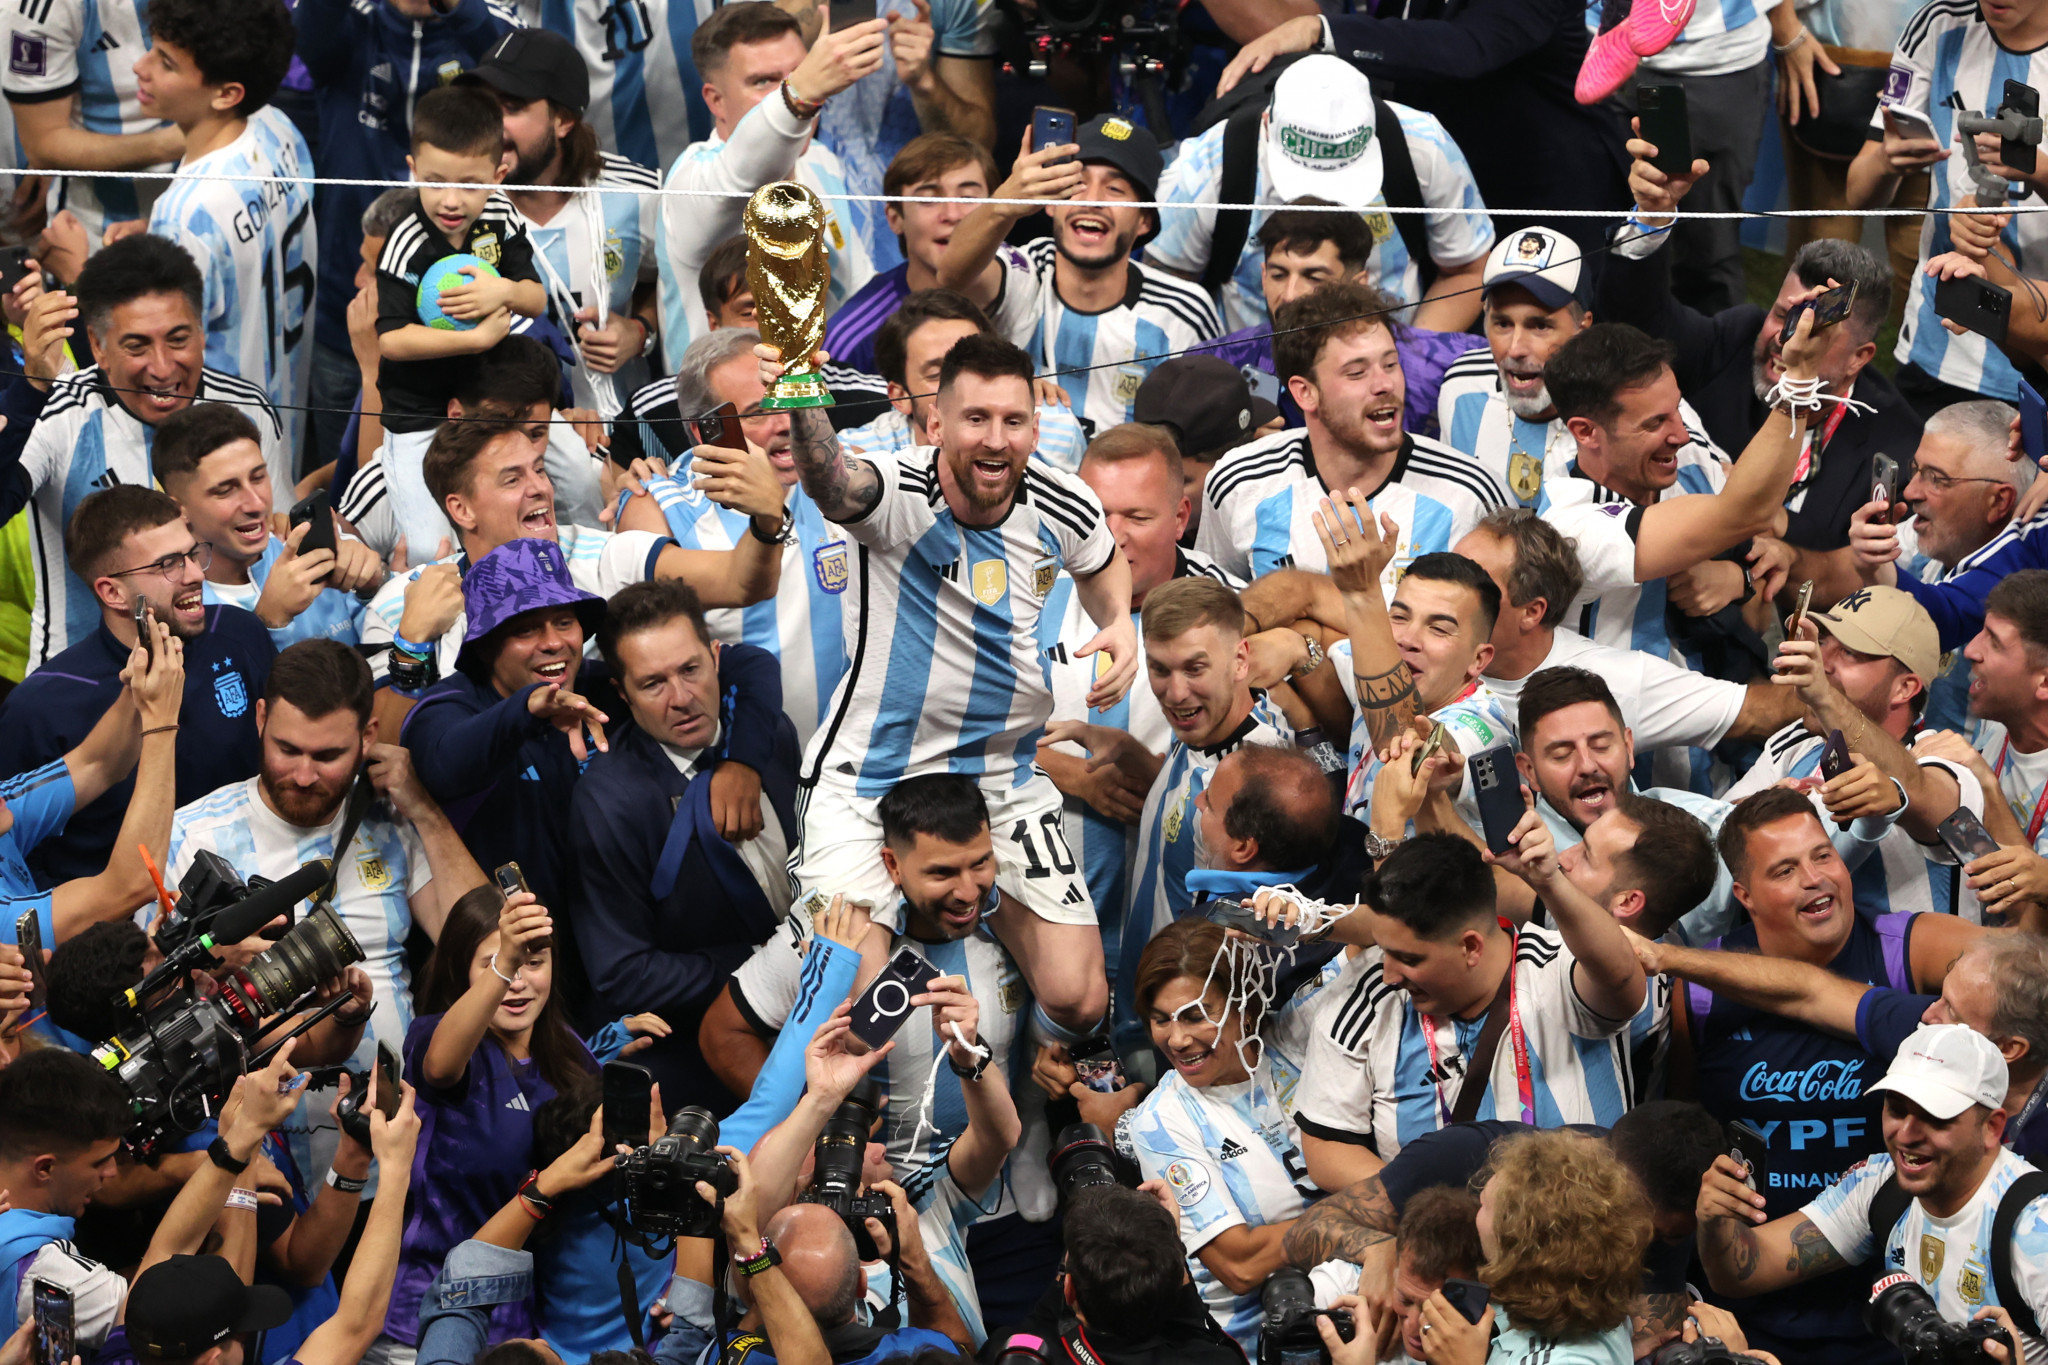 FIFA launches disciplinary case against Argentina over World Cup final celebrations